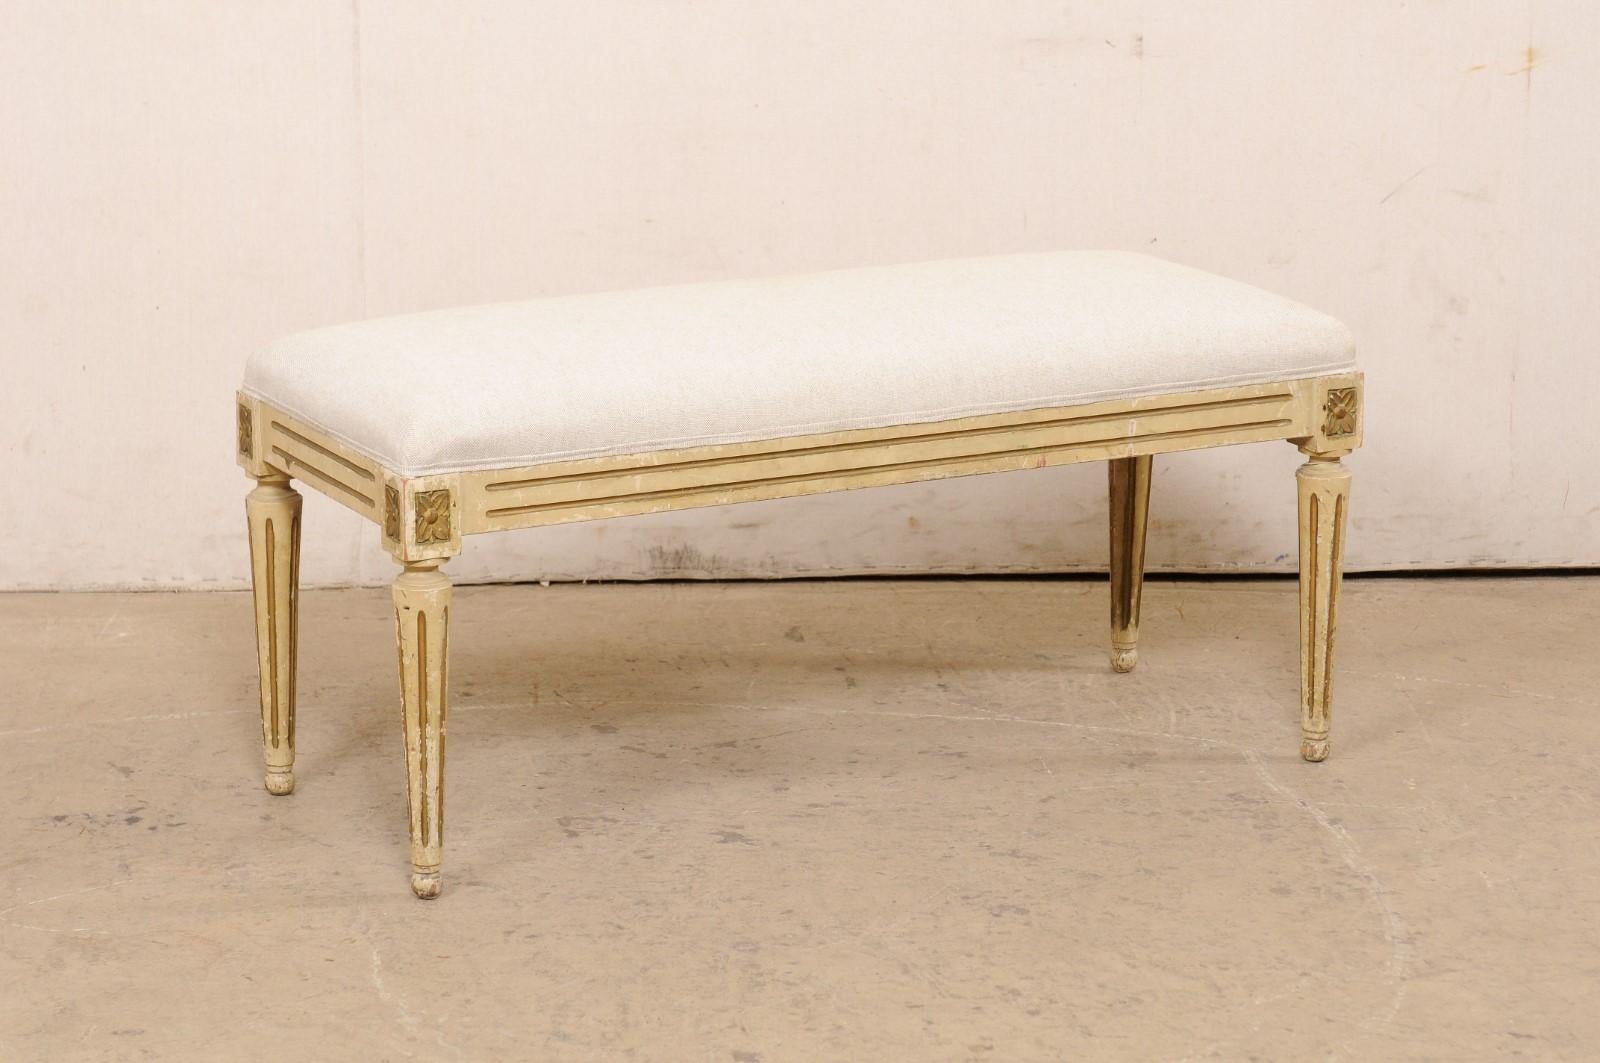 A French Louis XVI style upholstered bench, with its original painted finish, from the 19th century. This antique bench from France is designed in the Louis XVI style with flute carvings about the skirt, rosettes carved at each knee, and presented